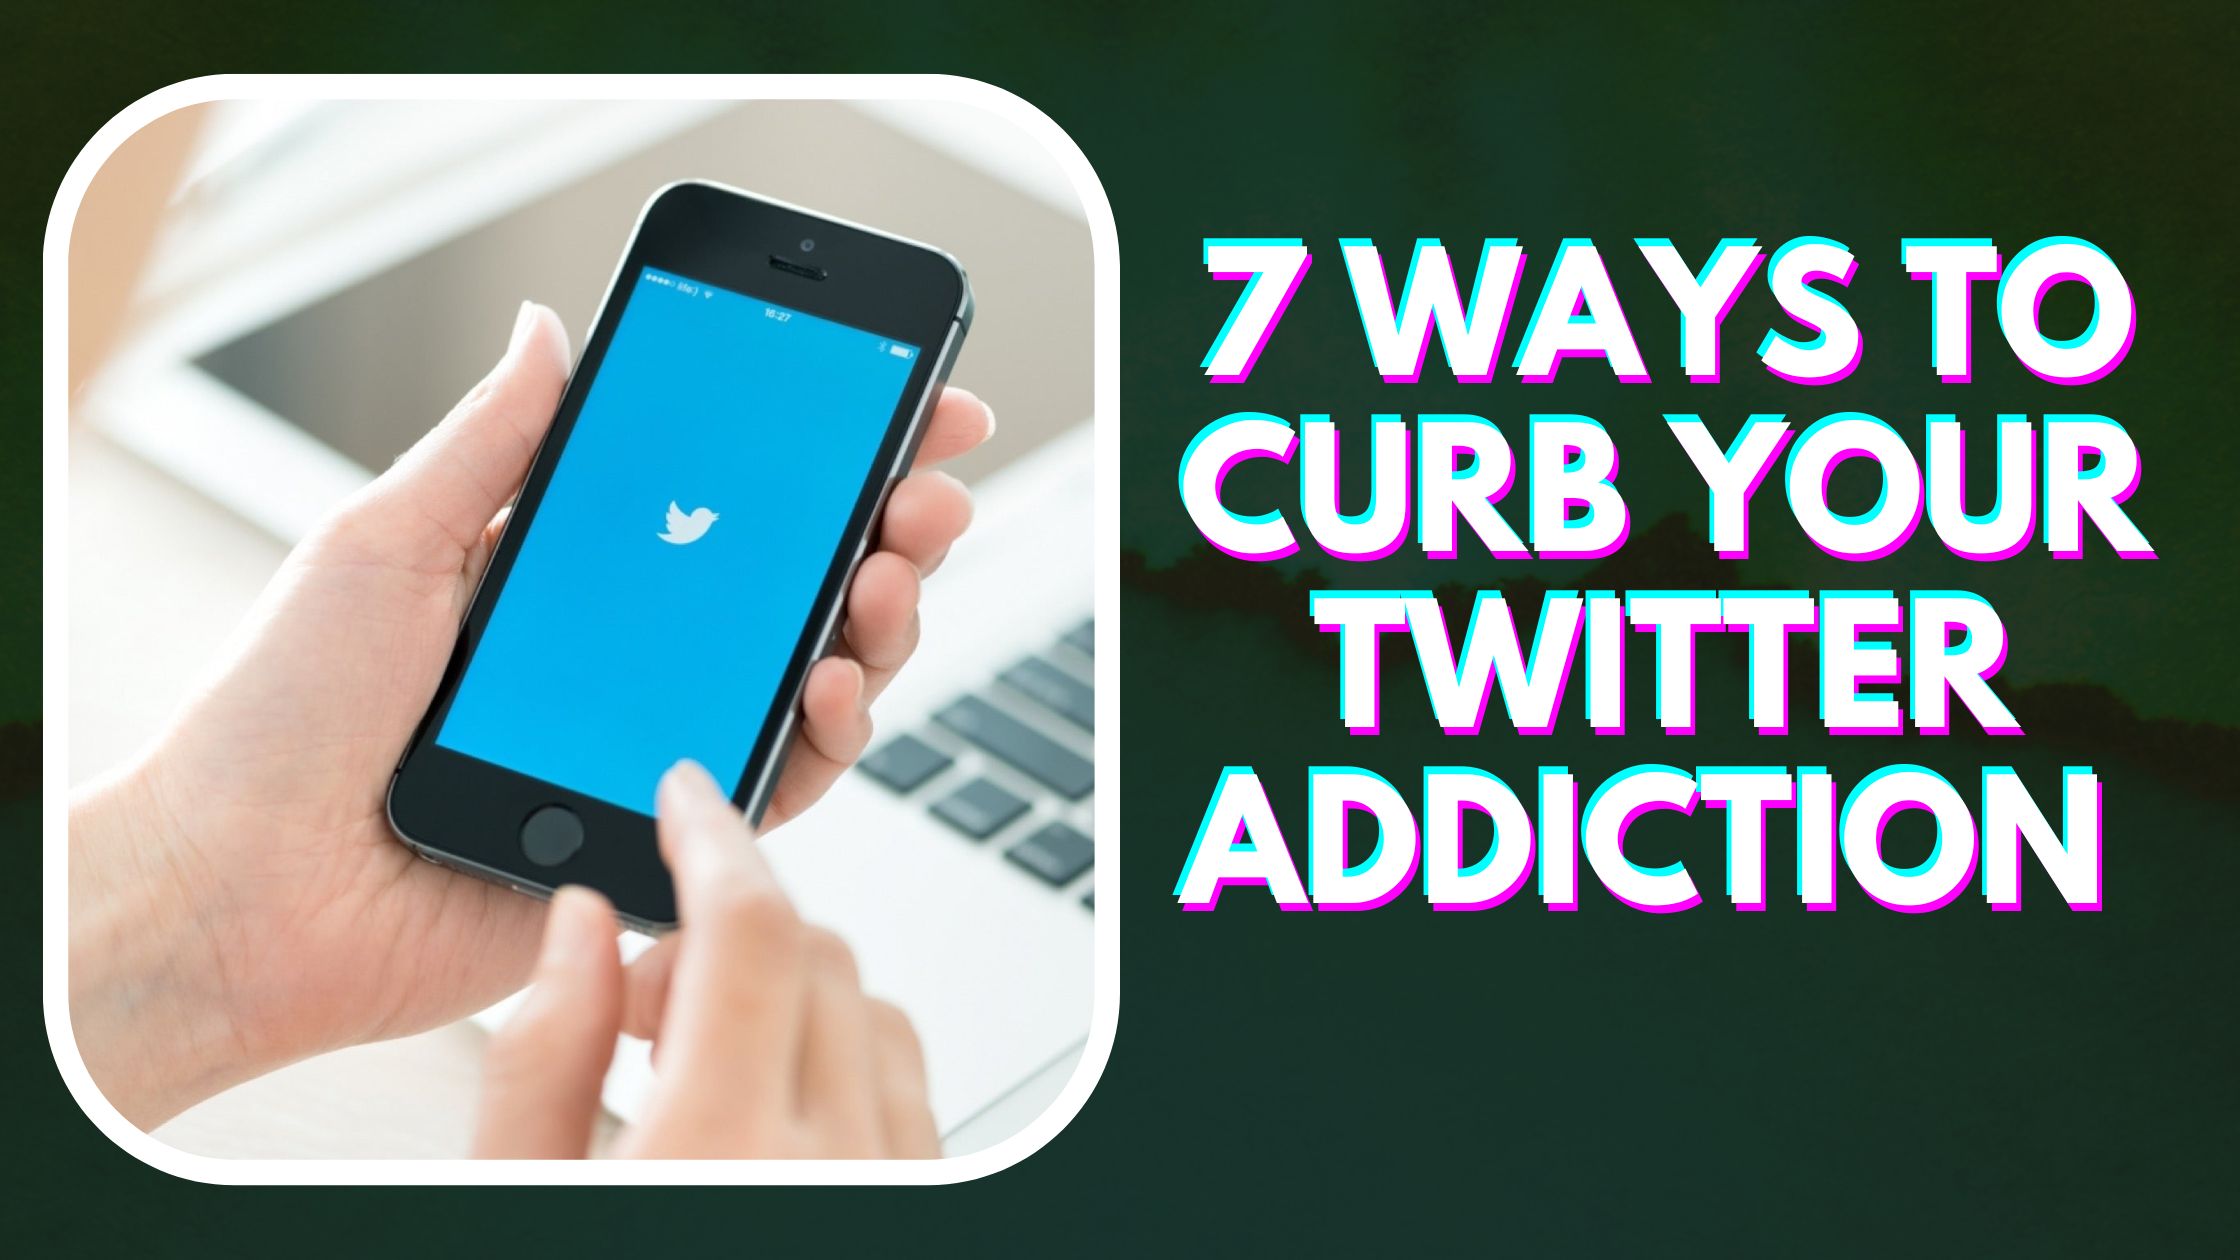 Well in search of a cure to my Twitter addiction, I found these 7 tips that can help you, sorry us, cure our Twitter addiction.